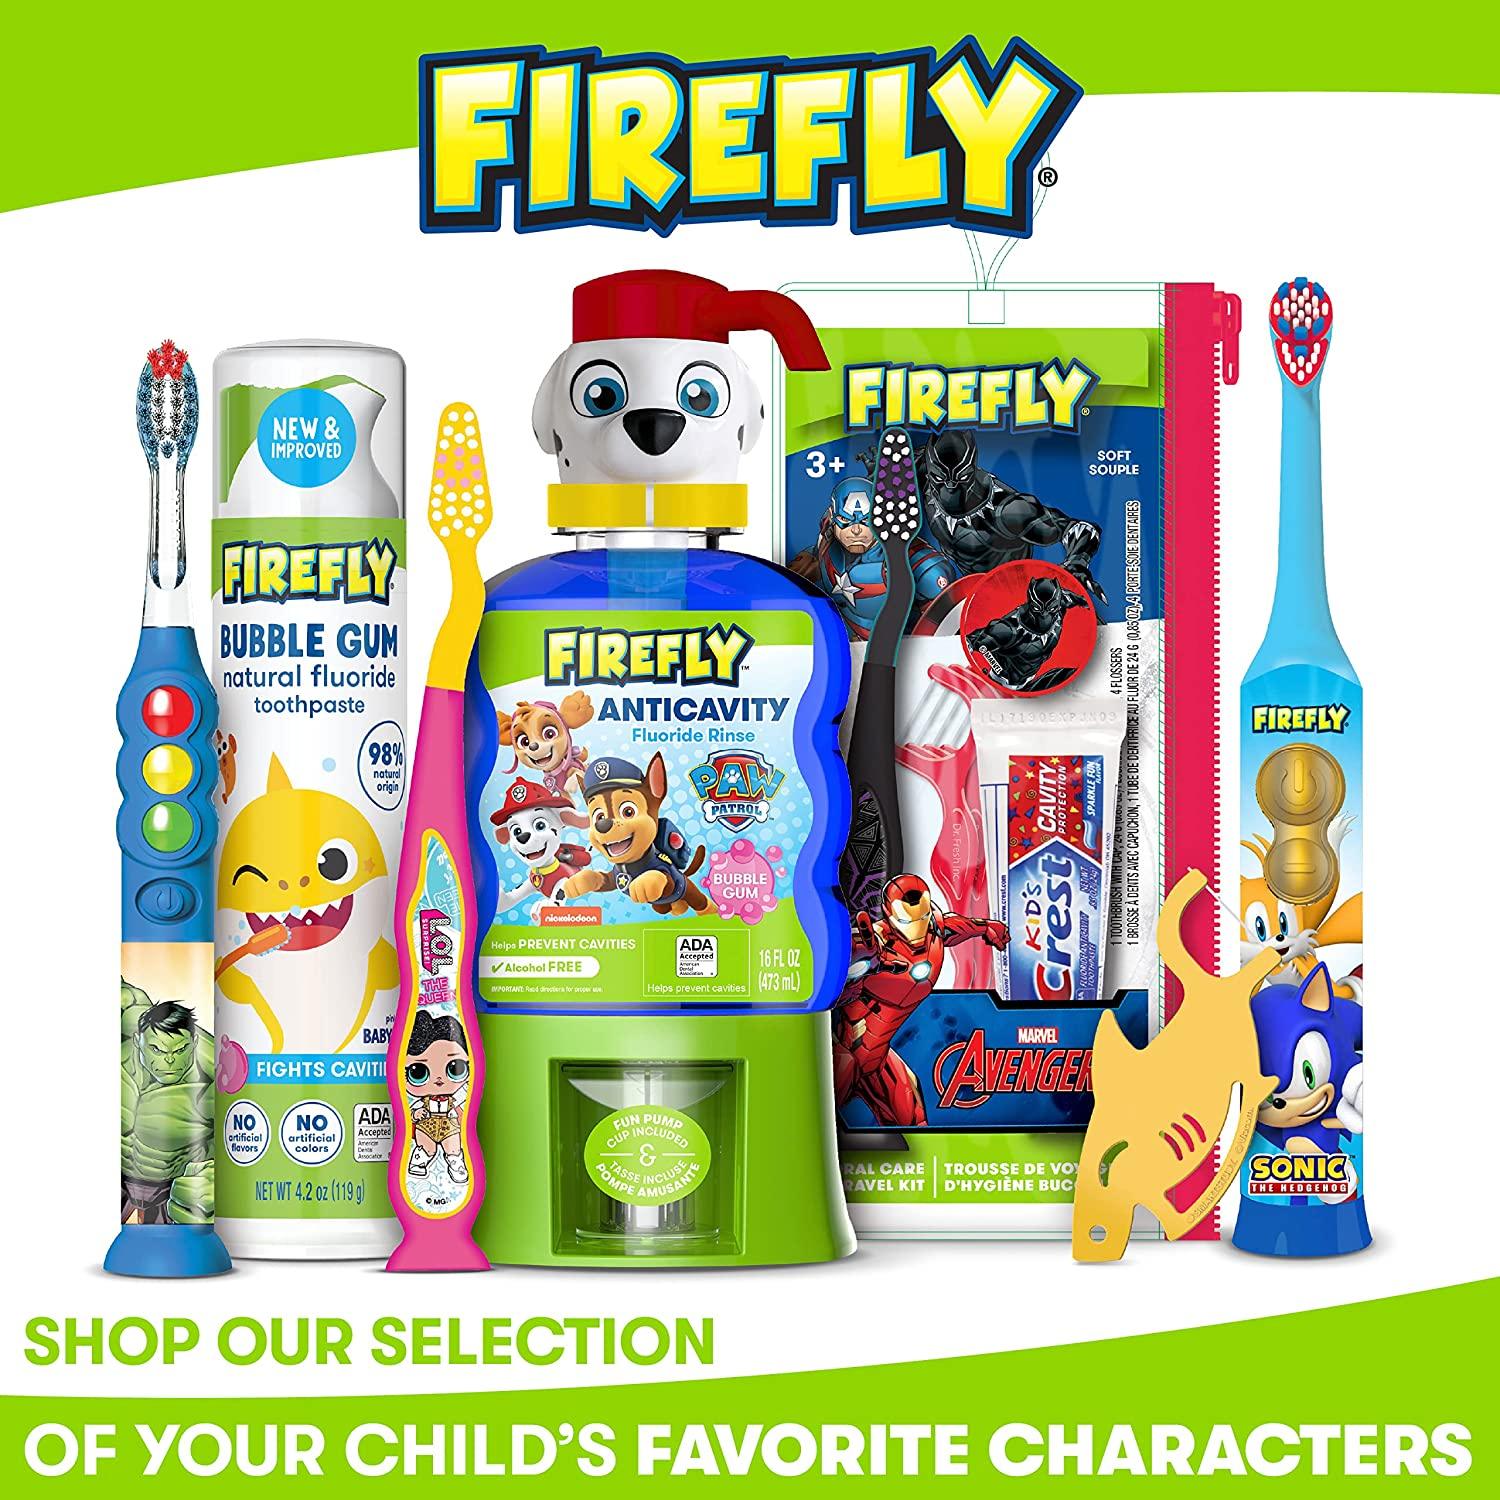 Firefly Clean N' Protect L.o.l. Surprise! Power Toothbrush Cover, 1-count (characters May Vary) - BumbleToys - 5-7 Years, Baby Saftey & Health, Girls, Pre-Order, Toothbrush